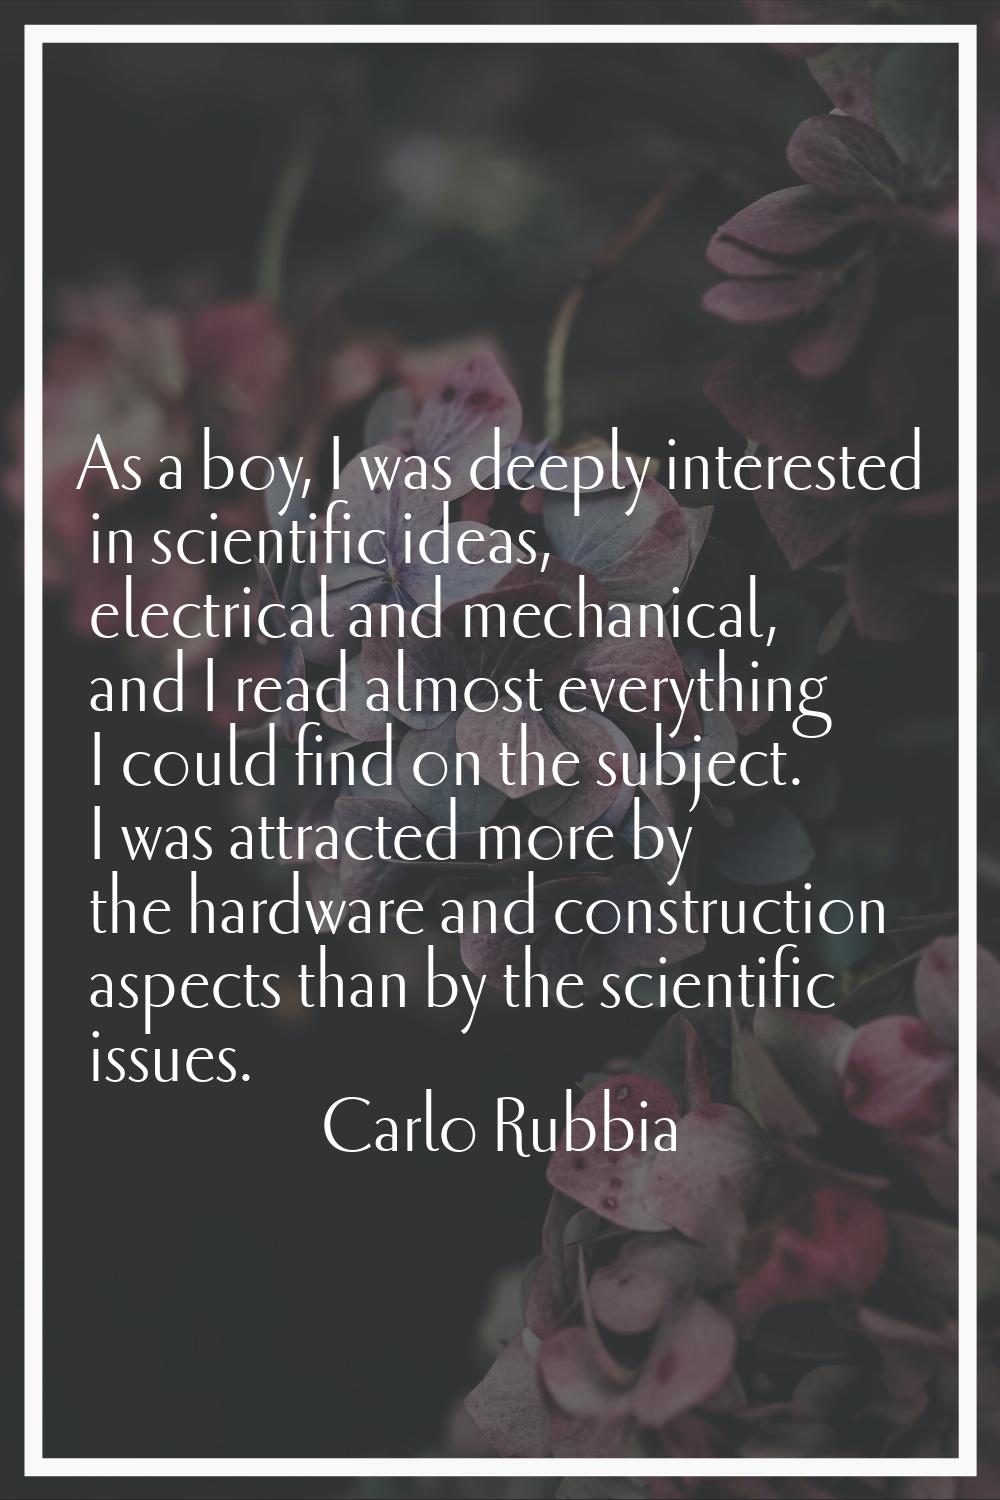 As a boy, I was deeply interested in scientific ideas, electrical and mechanical, and I read almost